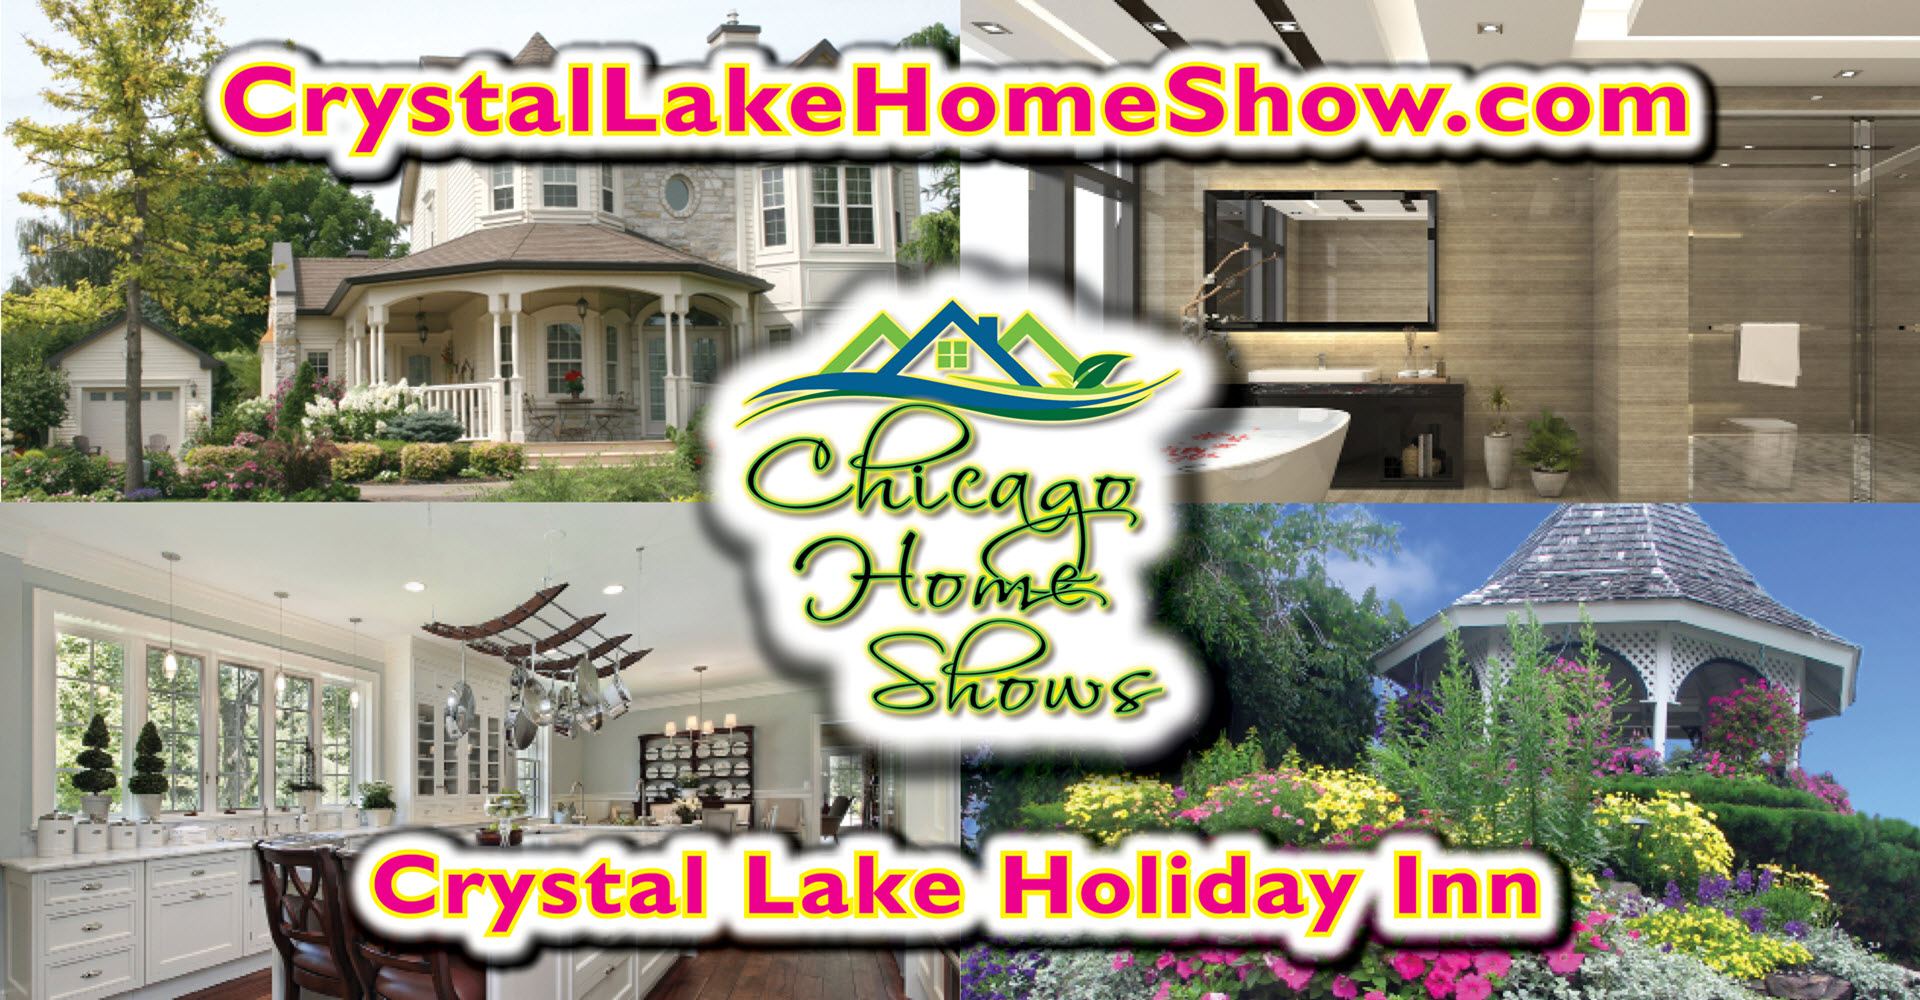 <h1 class="tribe-events-single-event-title">You’re invited to the Crystal Lake Home Show!</h1>